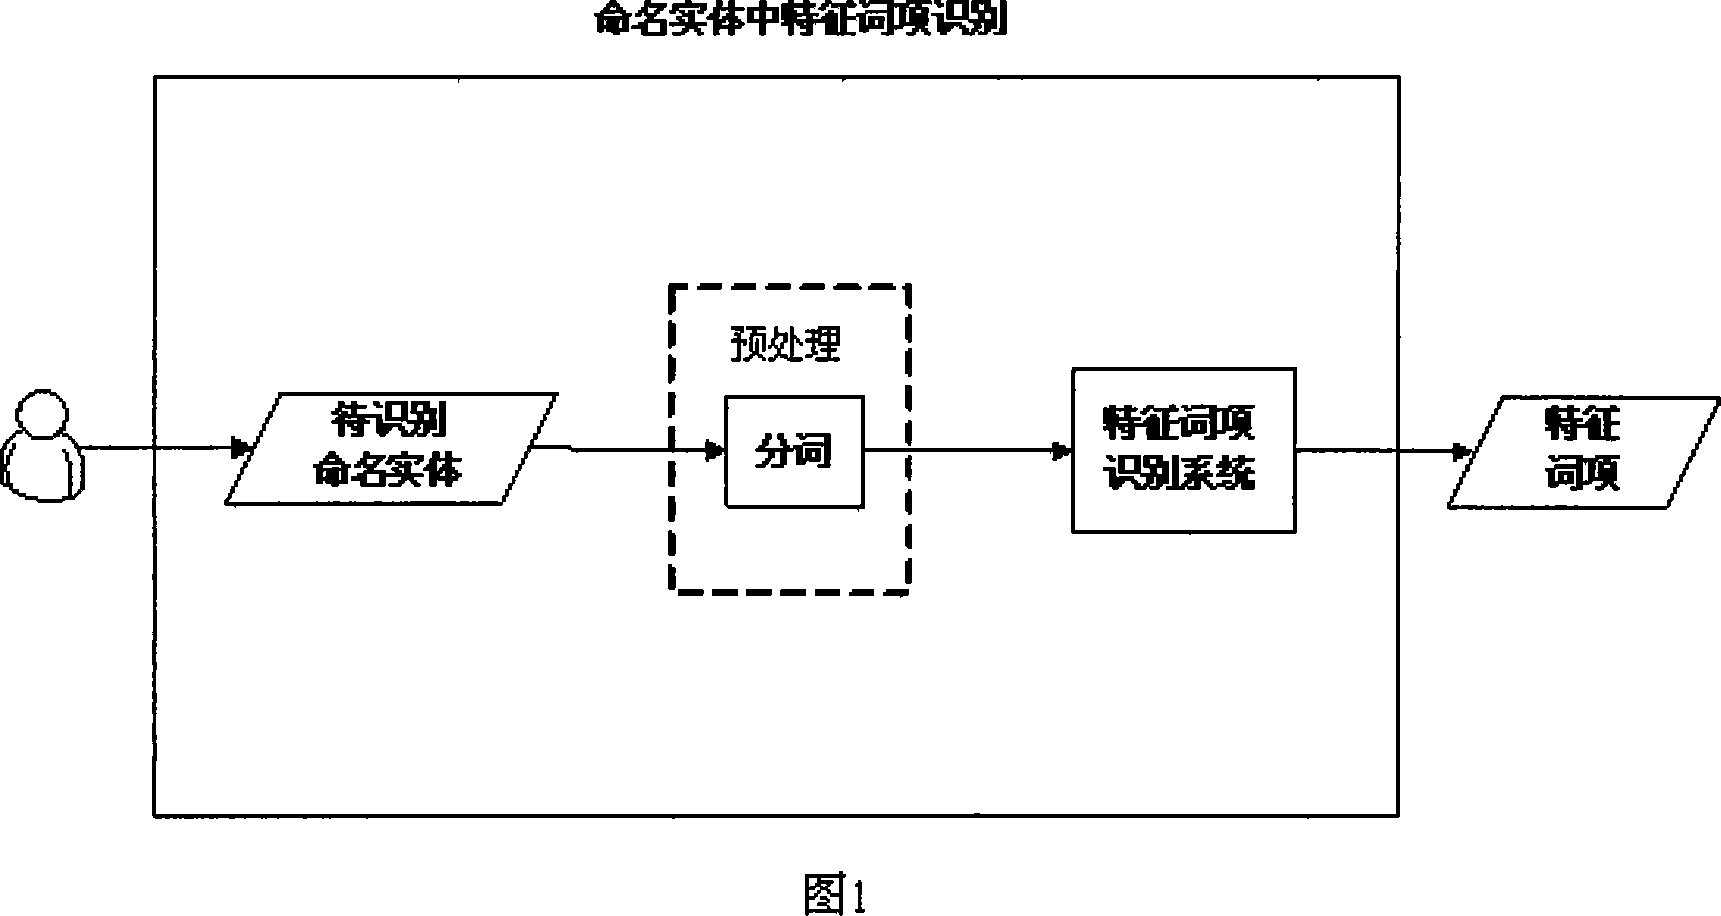 Method and system for recognizing feature lexical item in Chinese naming entity